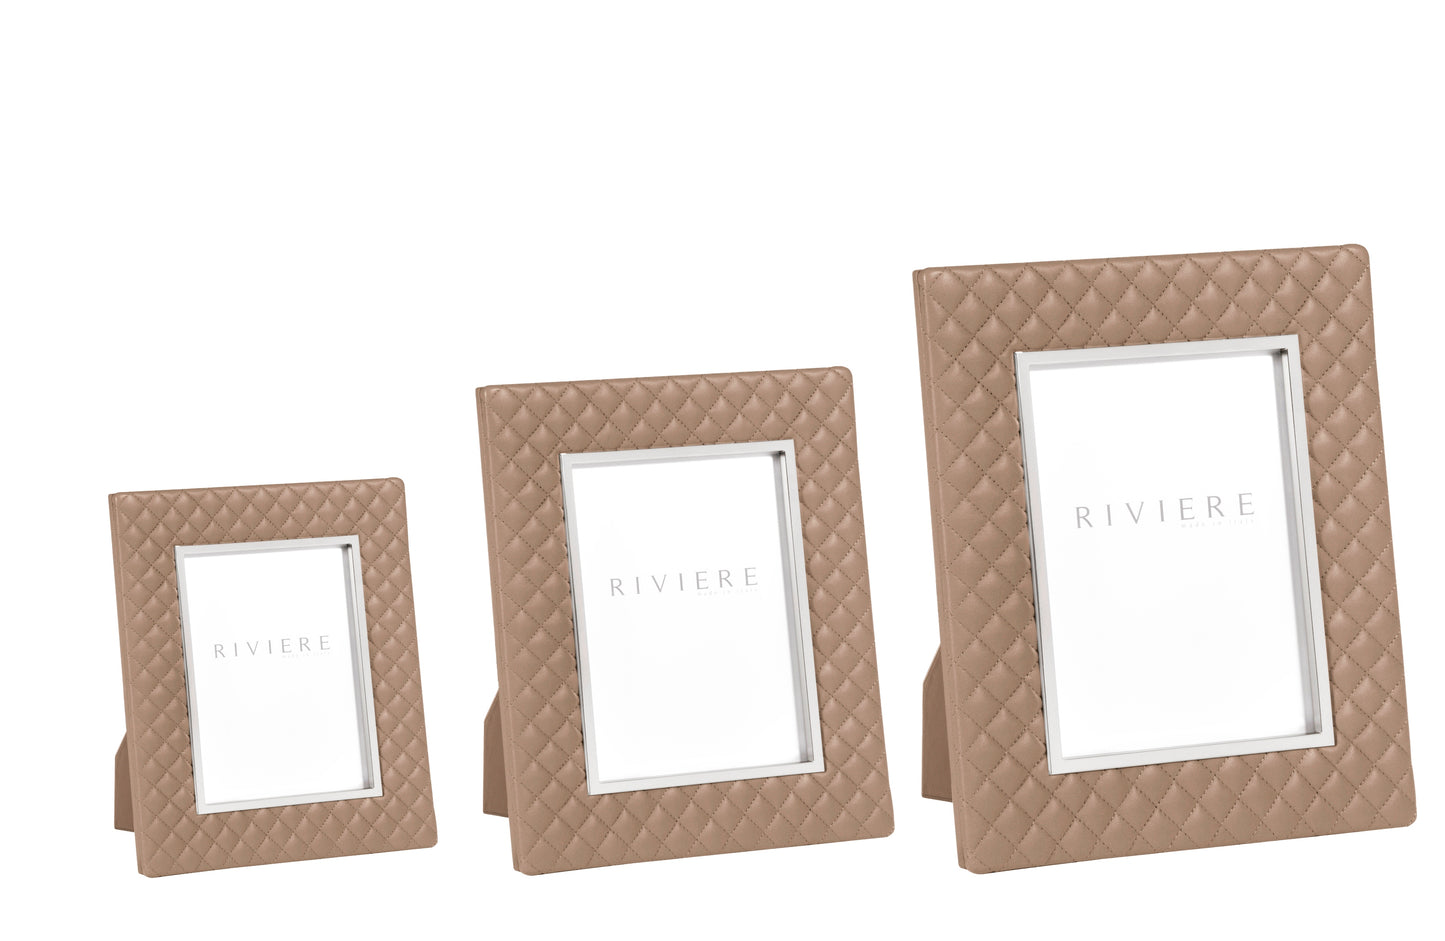 Riviere Anita Quilted Diamonds Leather Picture Frame With Metal Trim | Luxurious Quilted Leather Design | Elegant Metal Trim for a Sophisticated Touch | Elevate Your Home Decor with Luxury Accessories from Riviere | Available at 2Jour Concierge, #1 luxury high-end gift & lifestyle shop